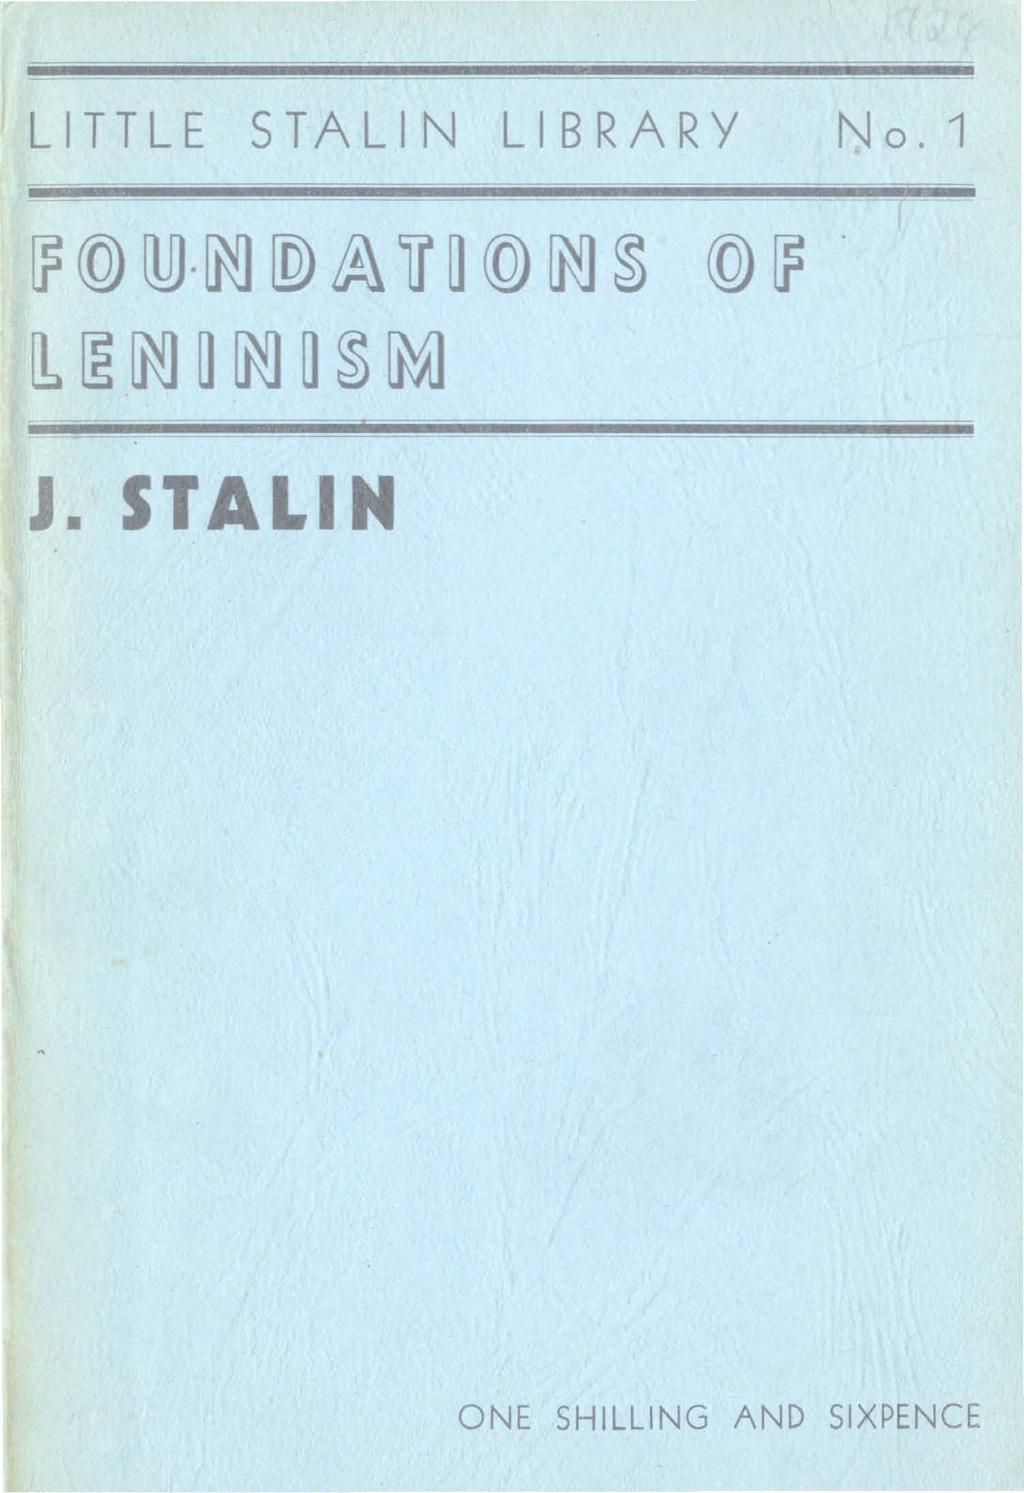 LITTLE STALIN LIBRARY No.1 [F @ lw [M [P) i!